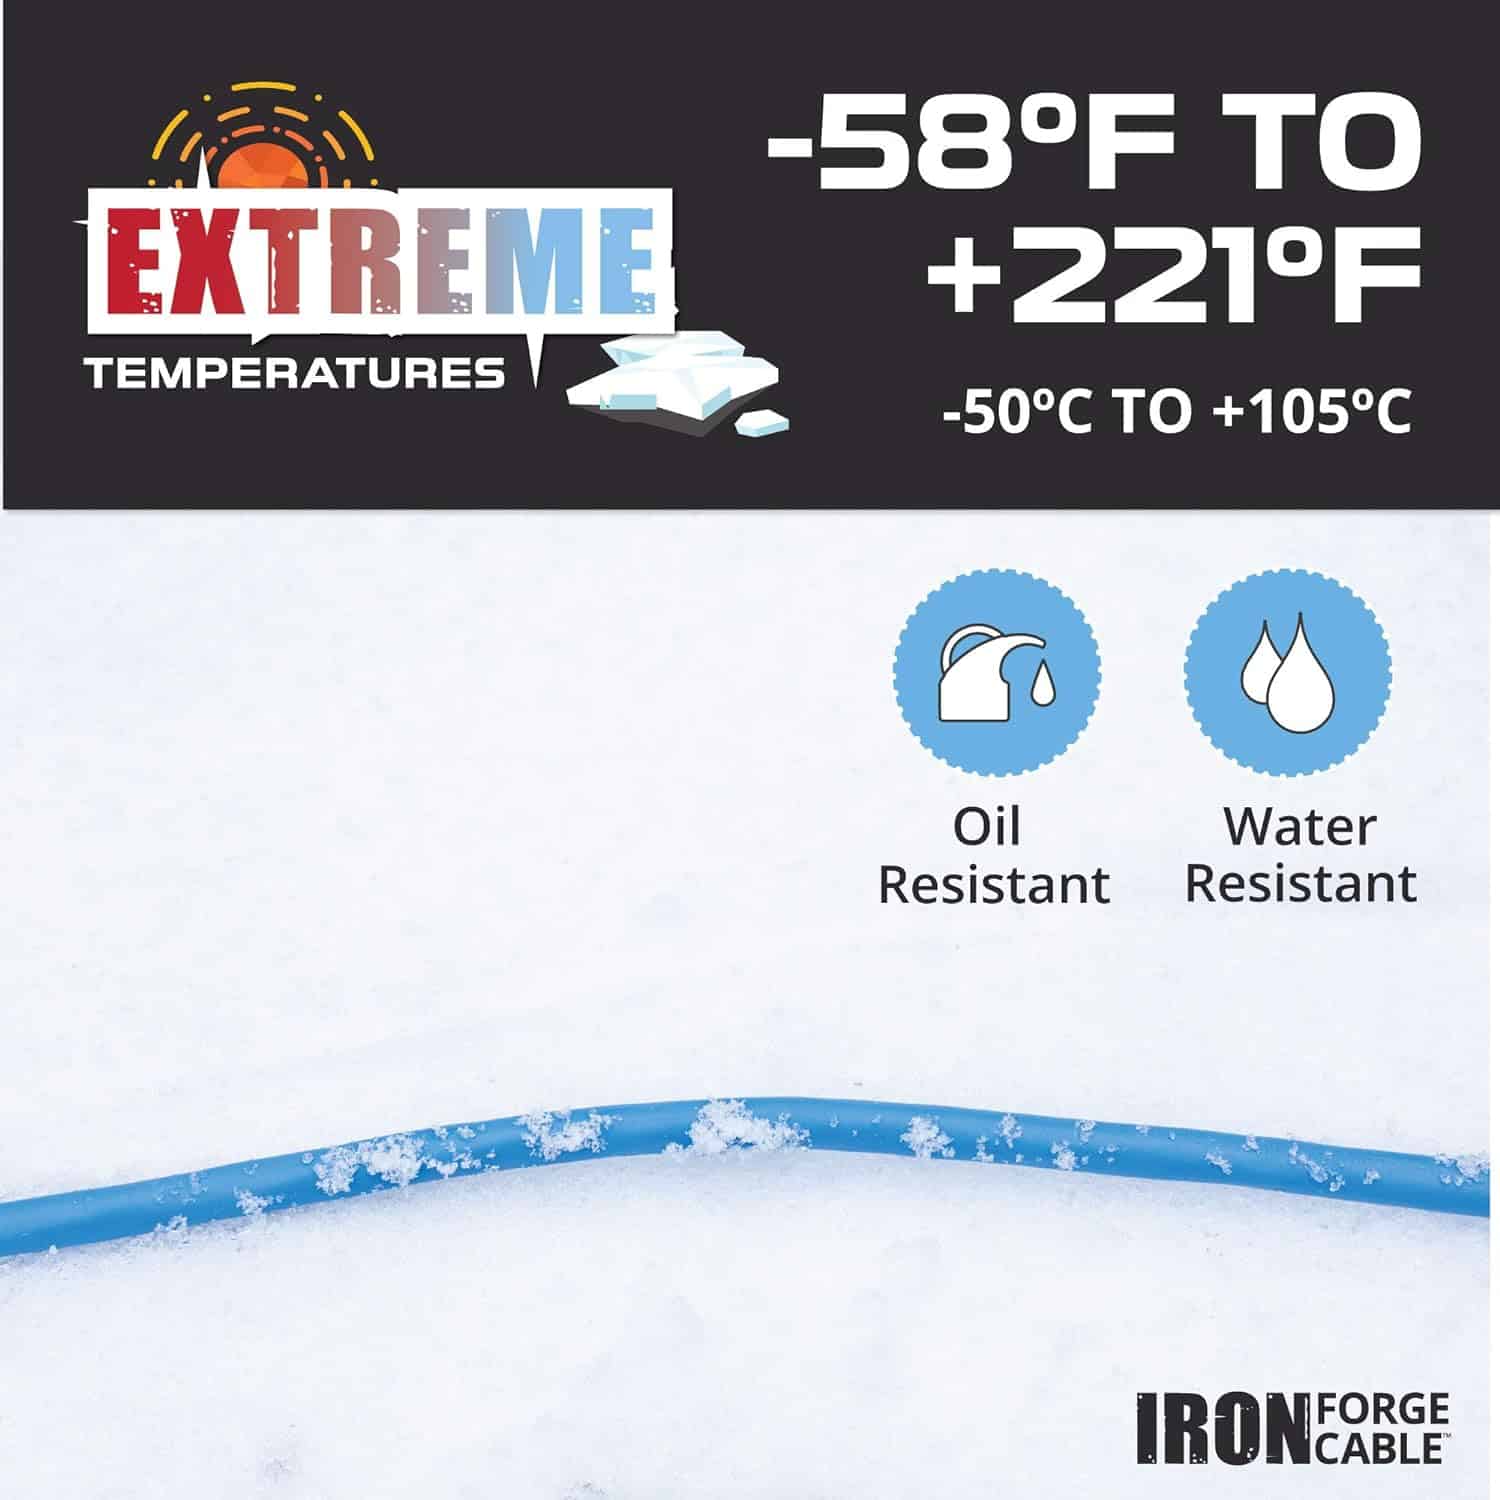 Iron Forge Cable 100 Ft All Weather Extension Cord – Stays Flexible in Extreme Cold & Hot Temperatures from -58°F to +221°F – 12 3 SJEOW Heavy Duty 3